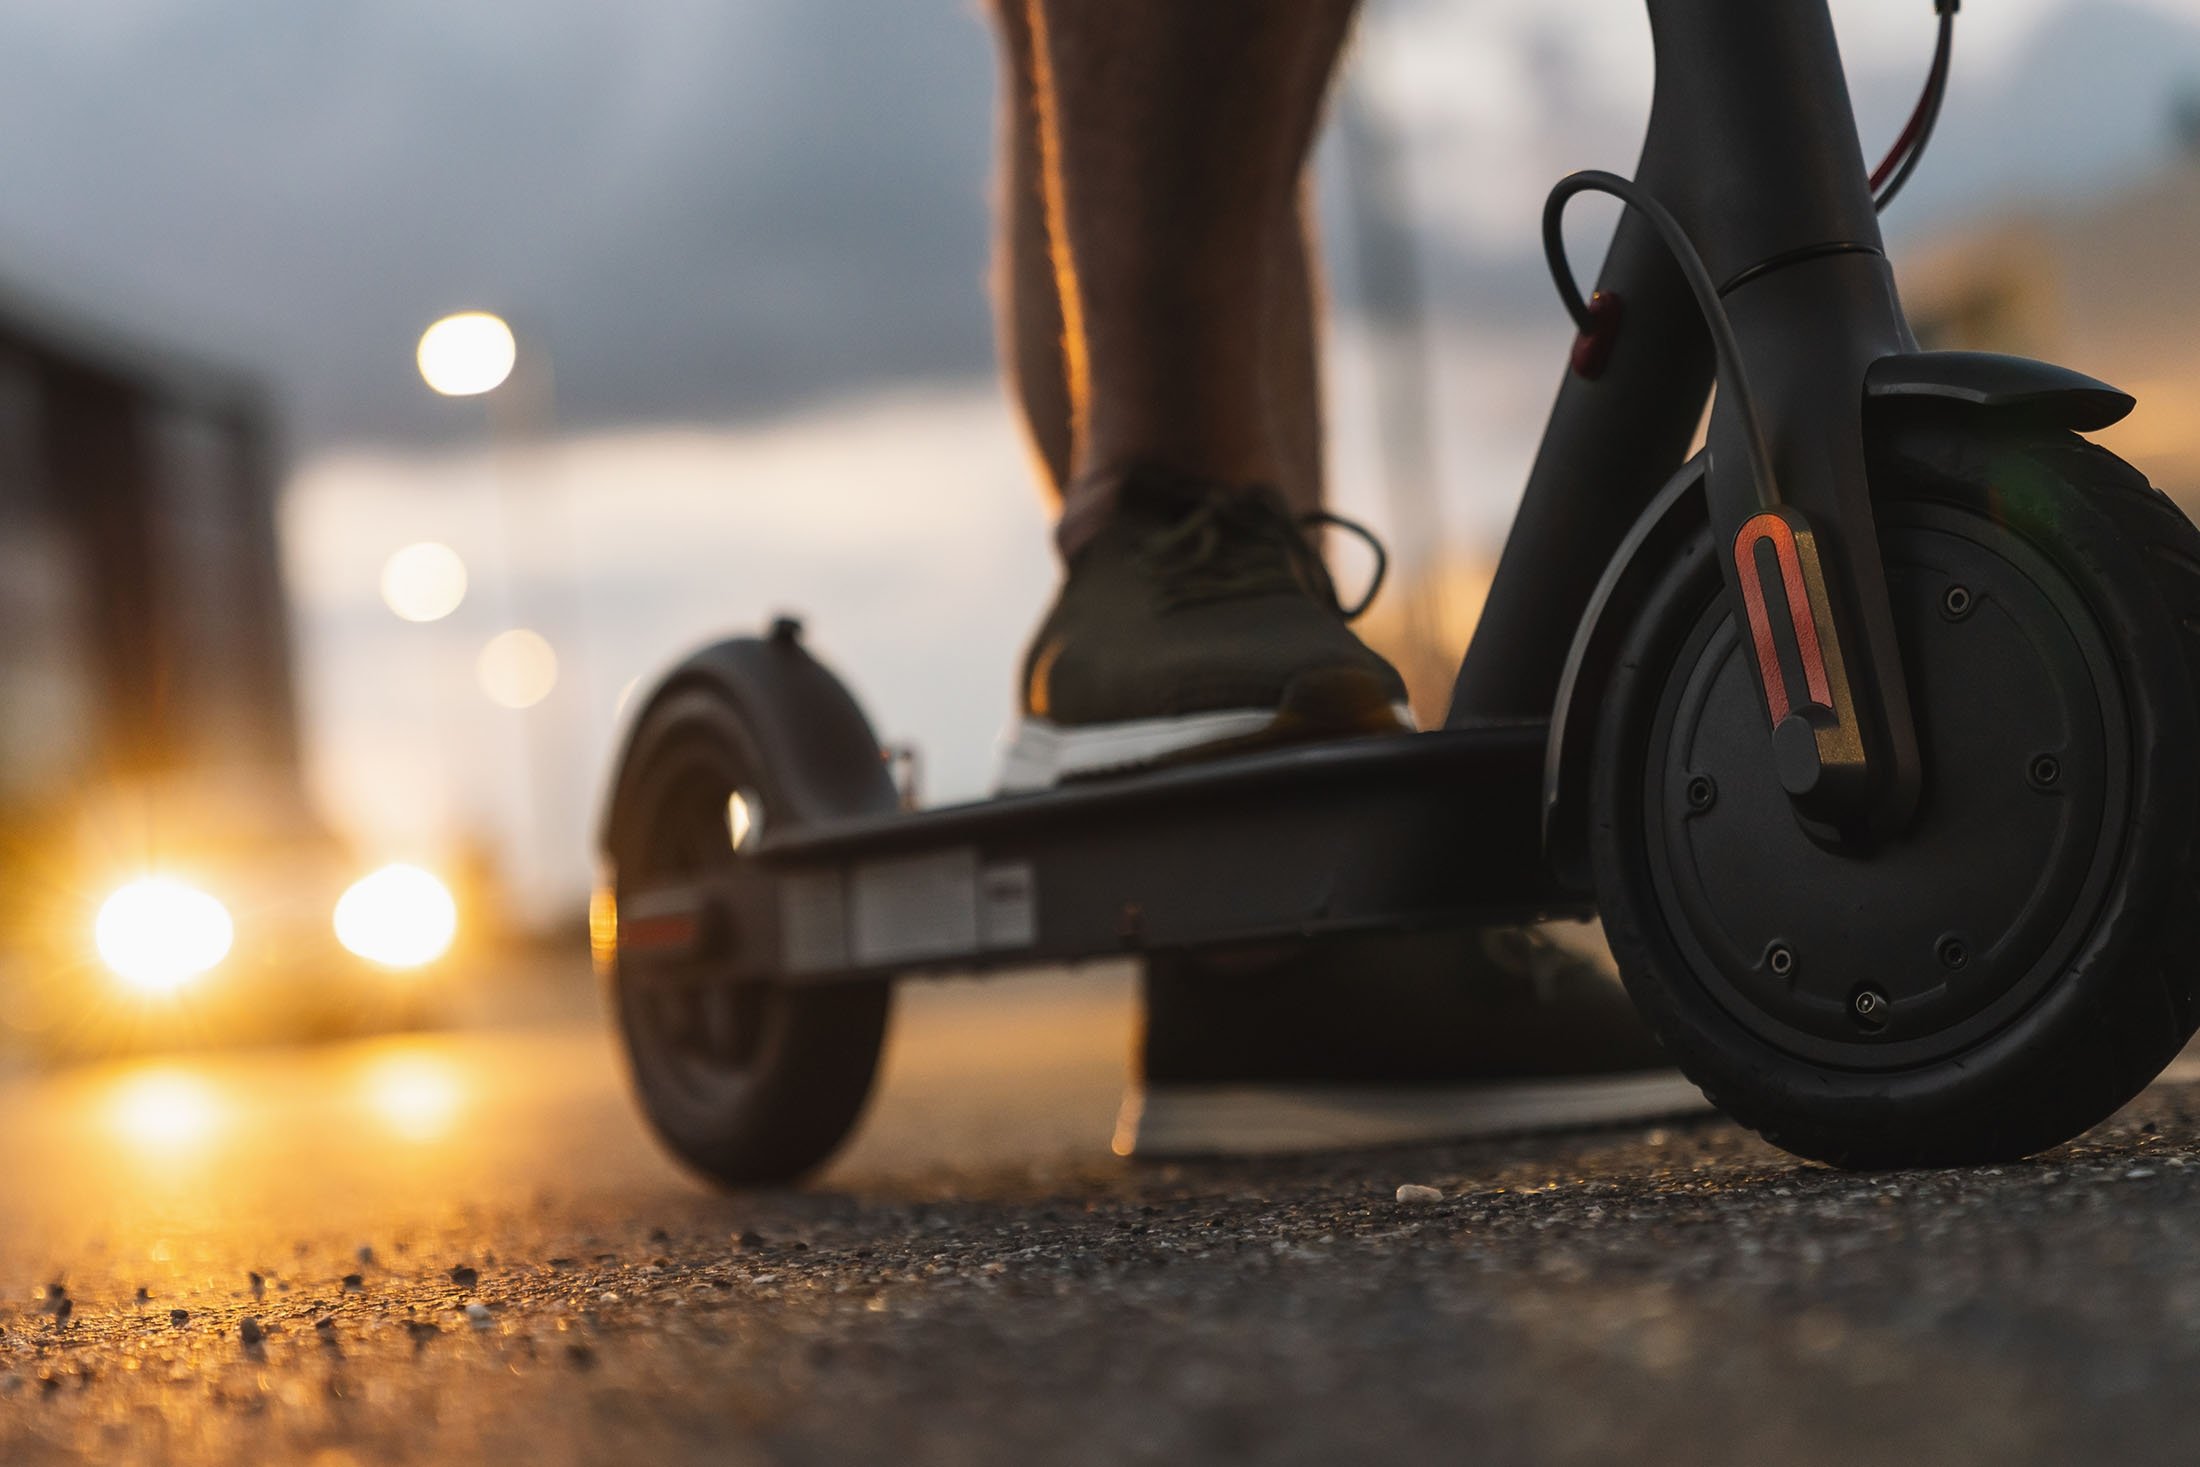 Kick scooters, also referred to as scooters, have been handmade in industrial urban areas in Europe and the United States since the 1920s or earlier, often as play items made for children to roam the streets. (Shutterstock Photo)